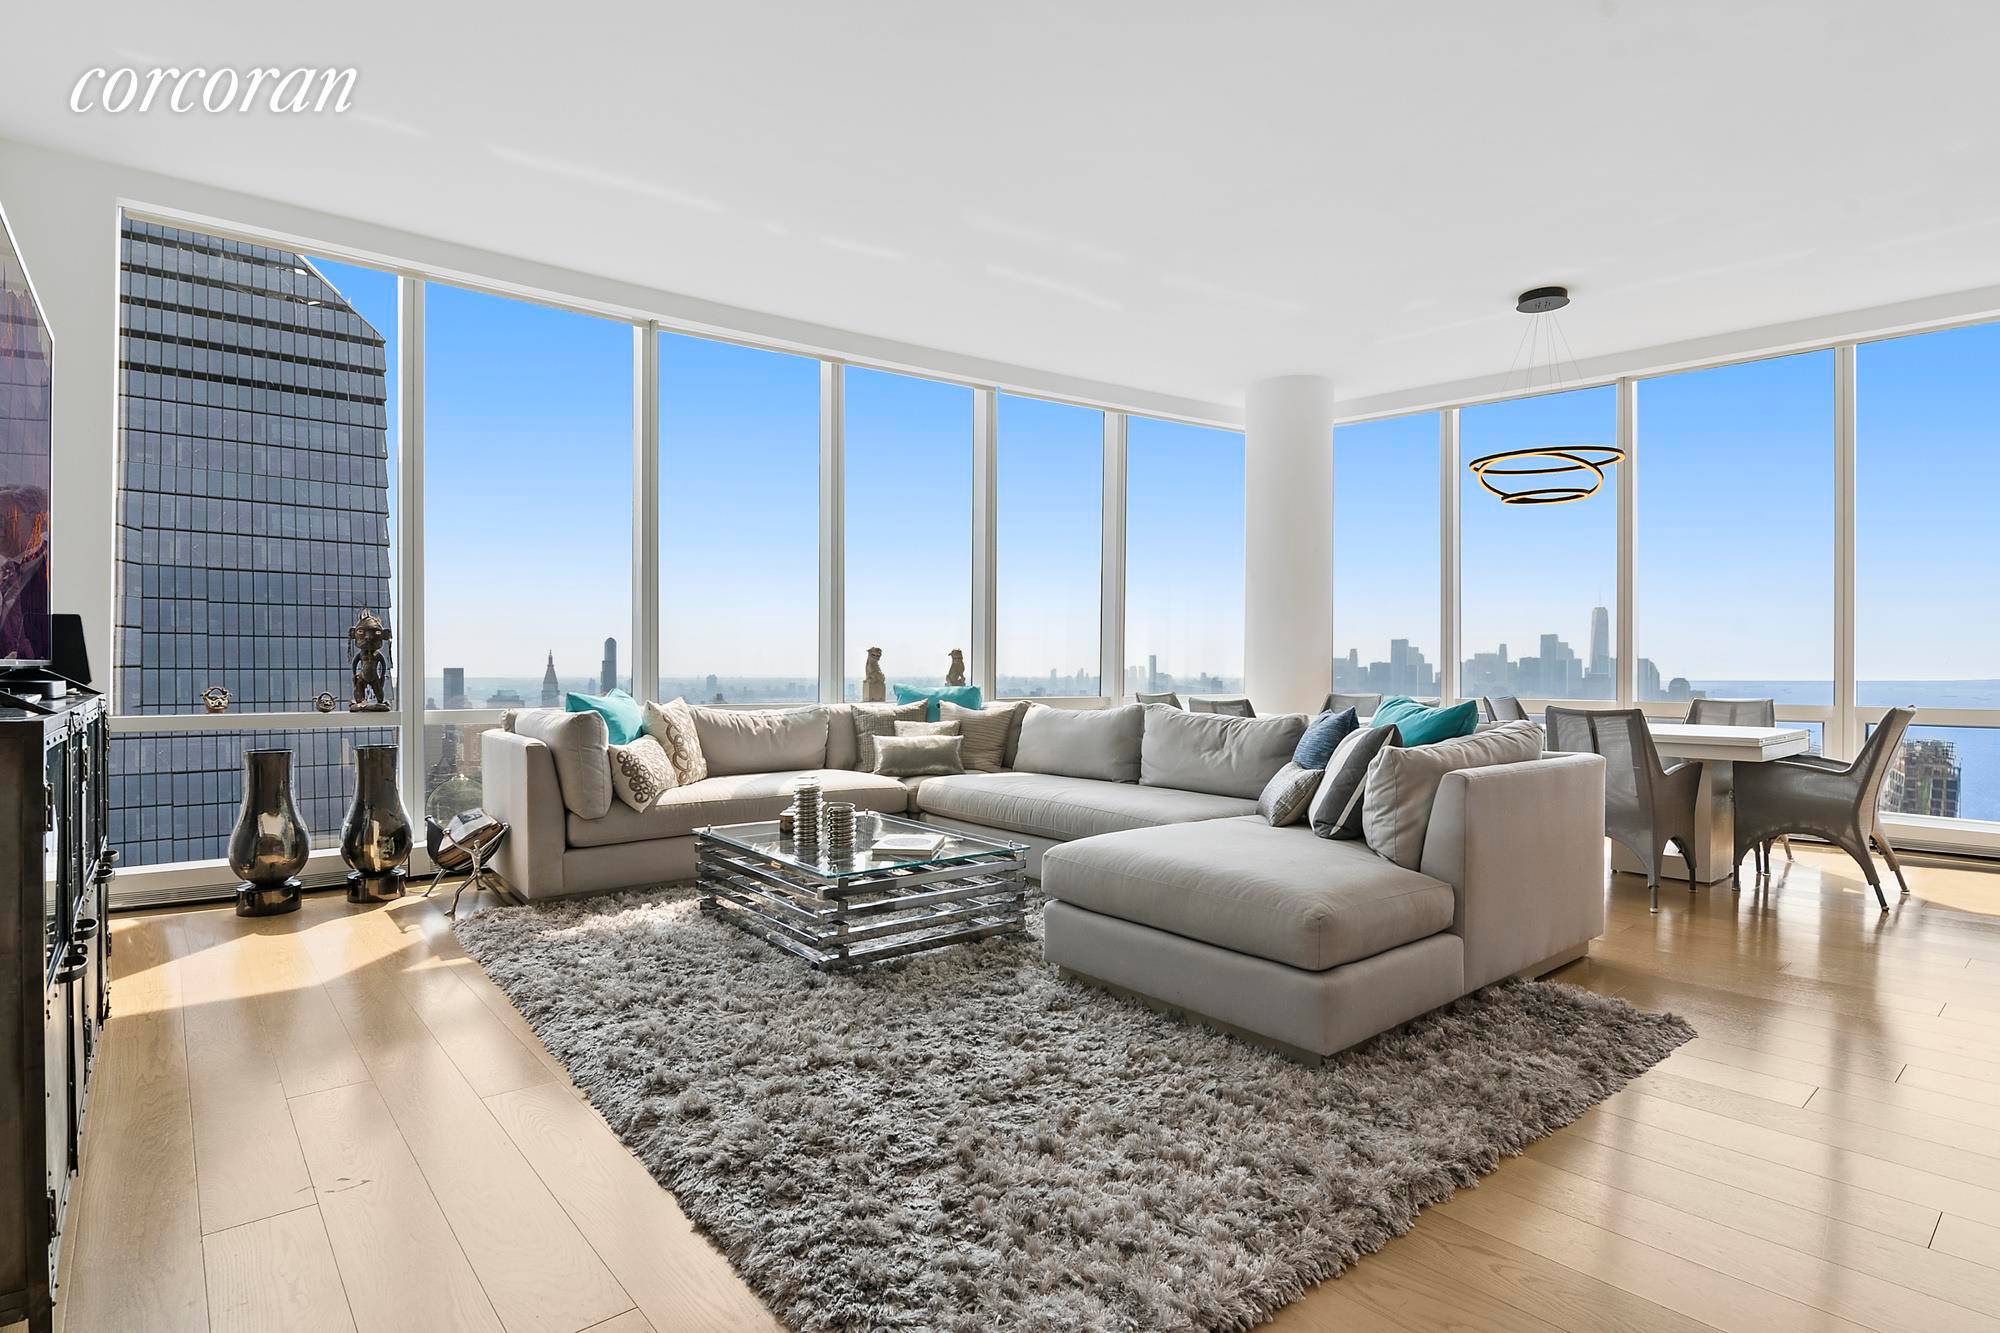 Rare South Facing A Line Residence Available With Sweeping Panoramas Introducing Residence 71A, a one of a kind home boasting iconic views of The Hudson River Freedom Tower Brooklyn Bridge ...